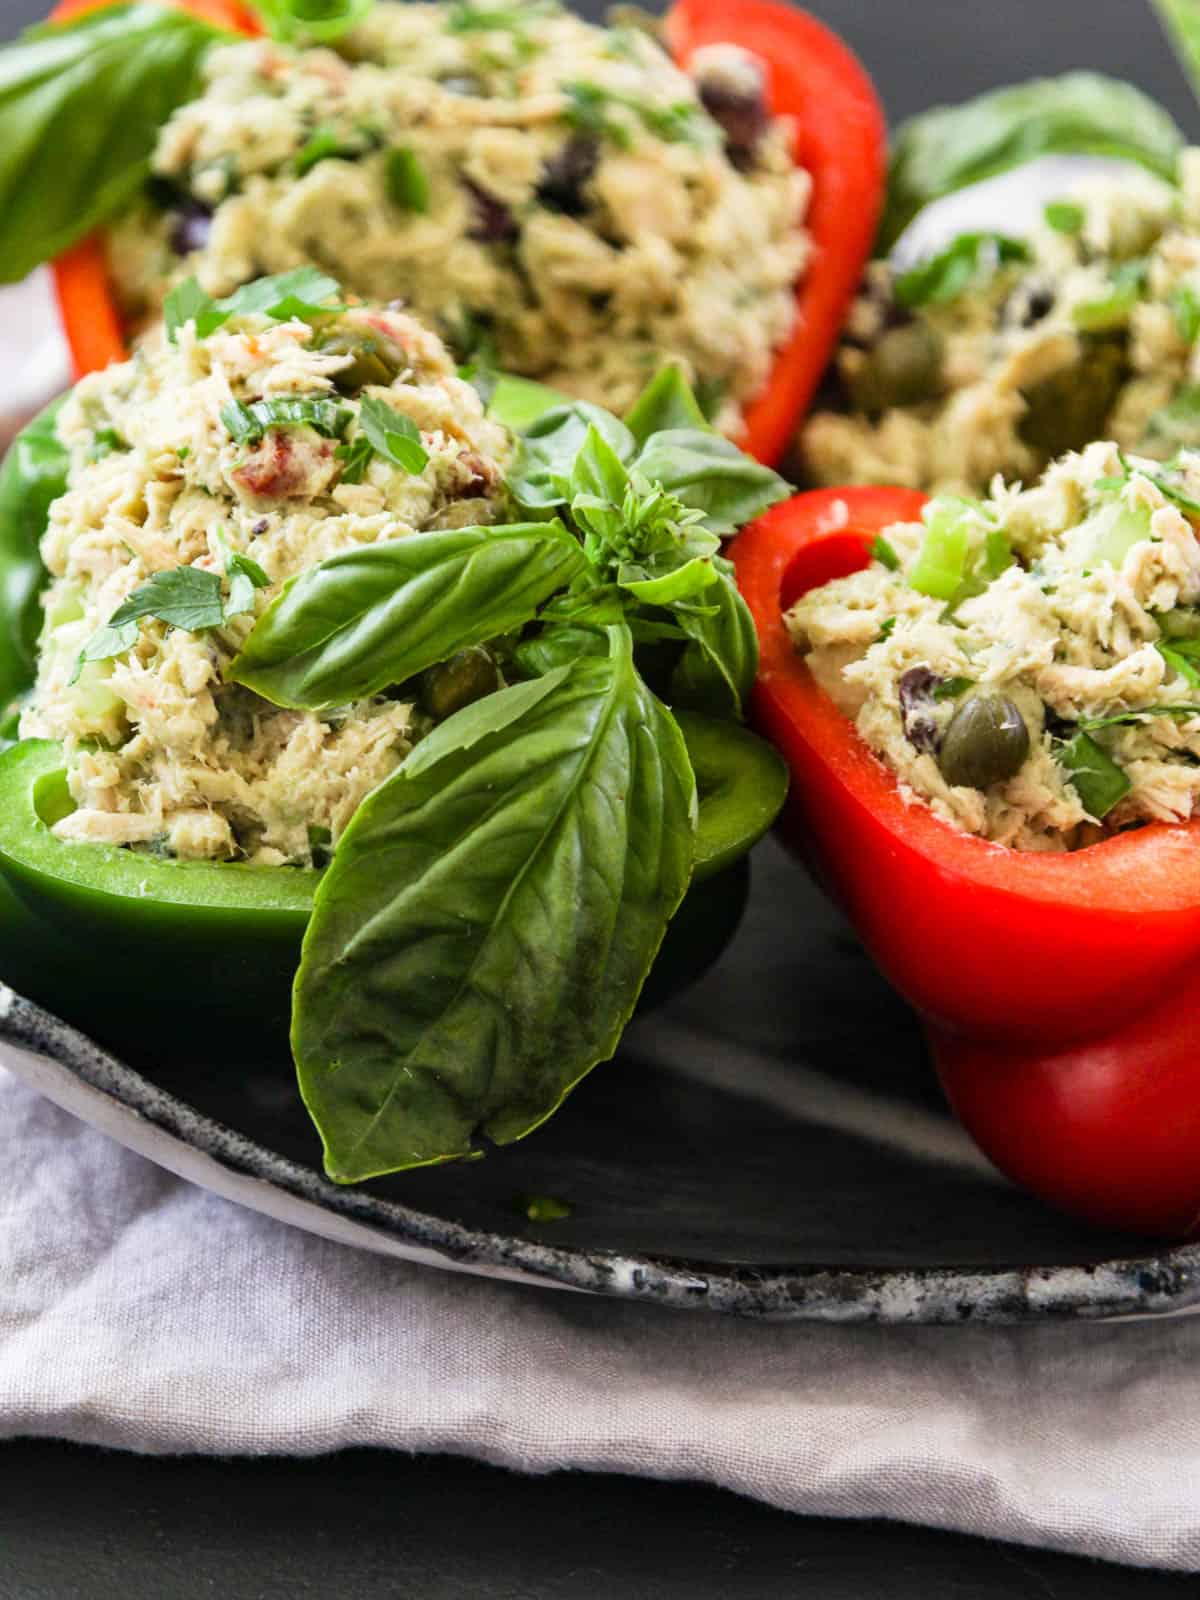 https://www.delicioustable.com/wp-content/uploads/2021/06/Bell-Pepper-Tuna-Salad.jpg